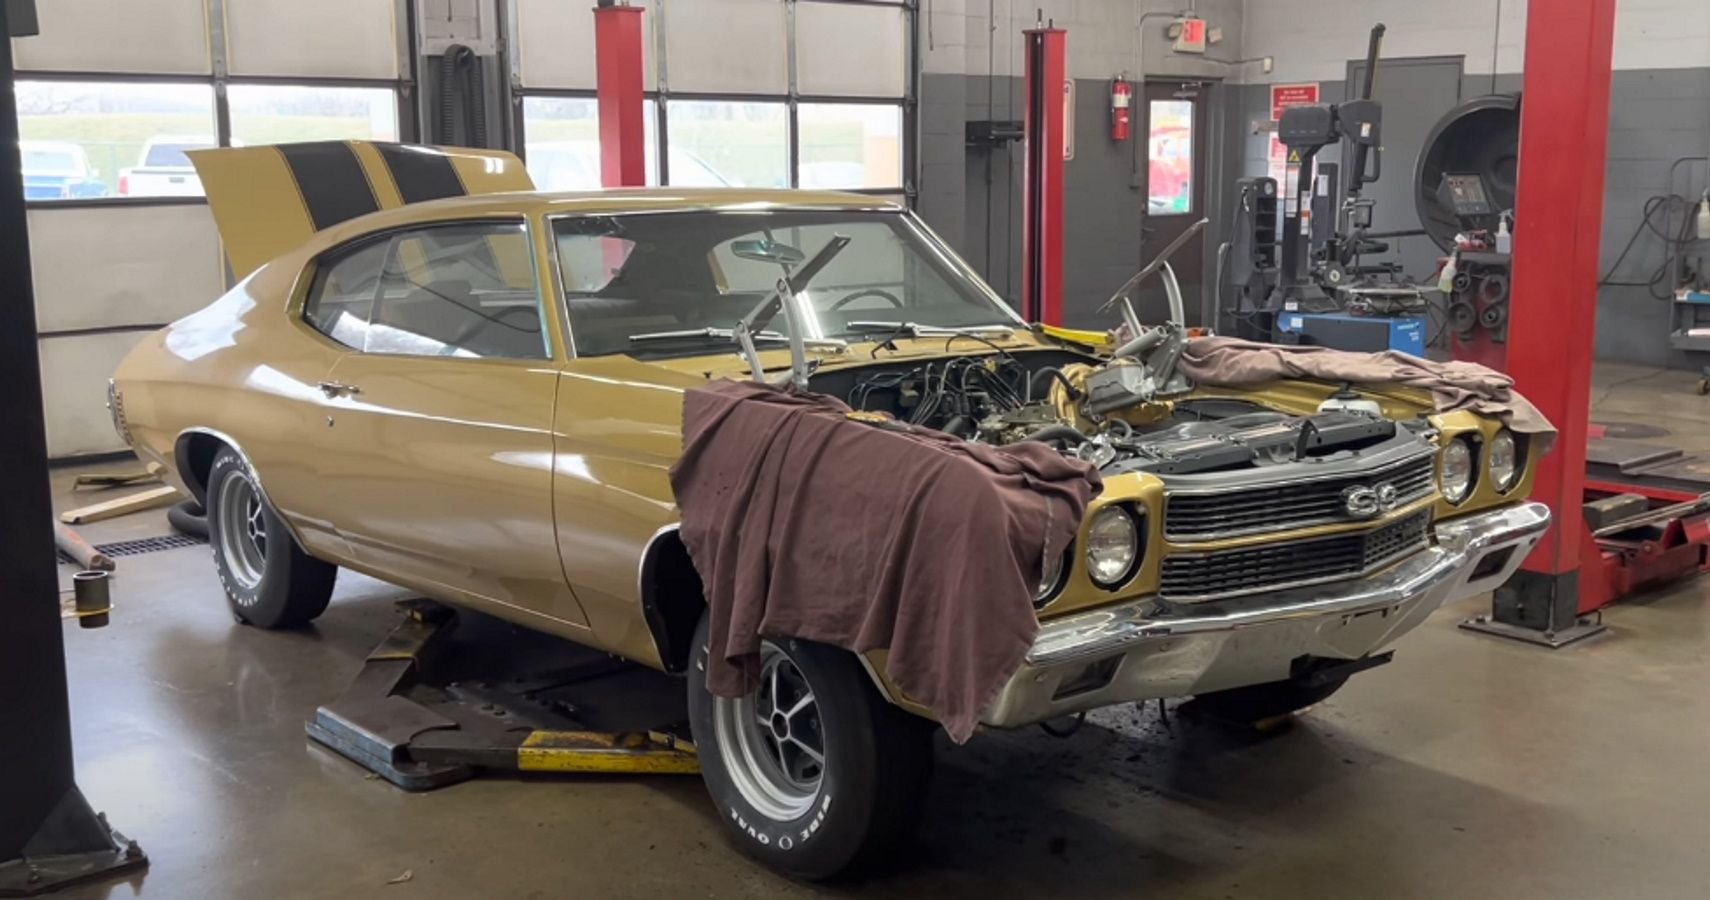 Find Out How This Epic 1970 Chevrolet Chevelle SS 454 LS6 Barn Find Got Restored